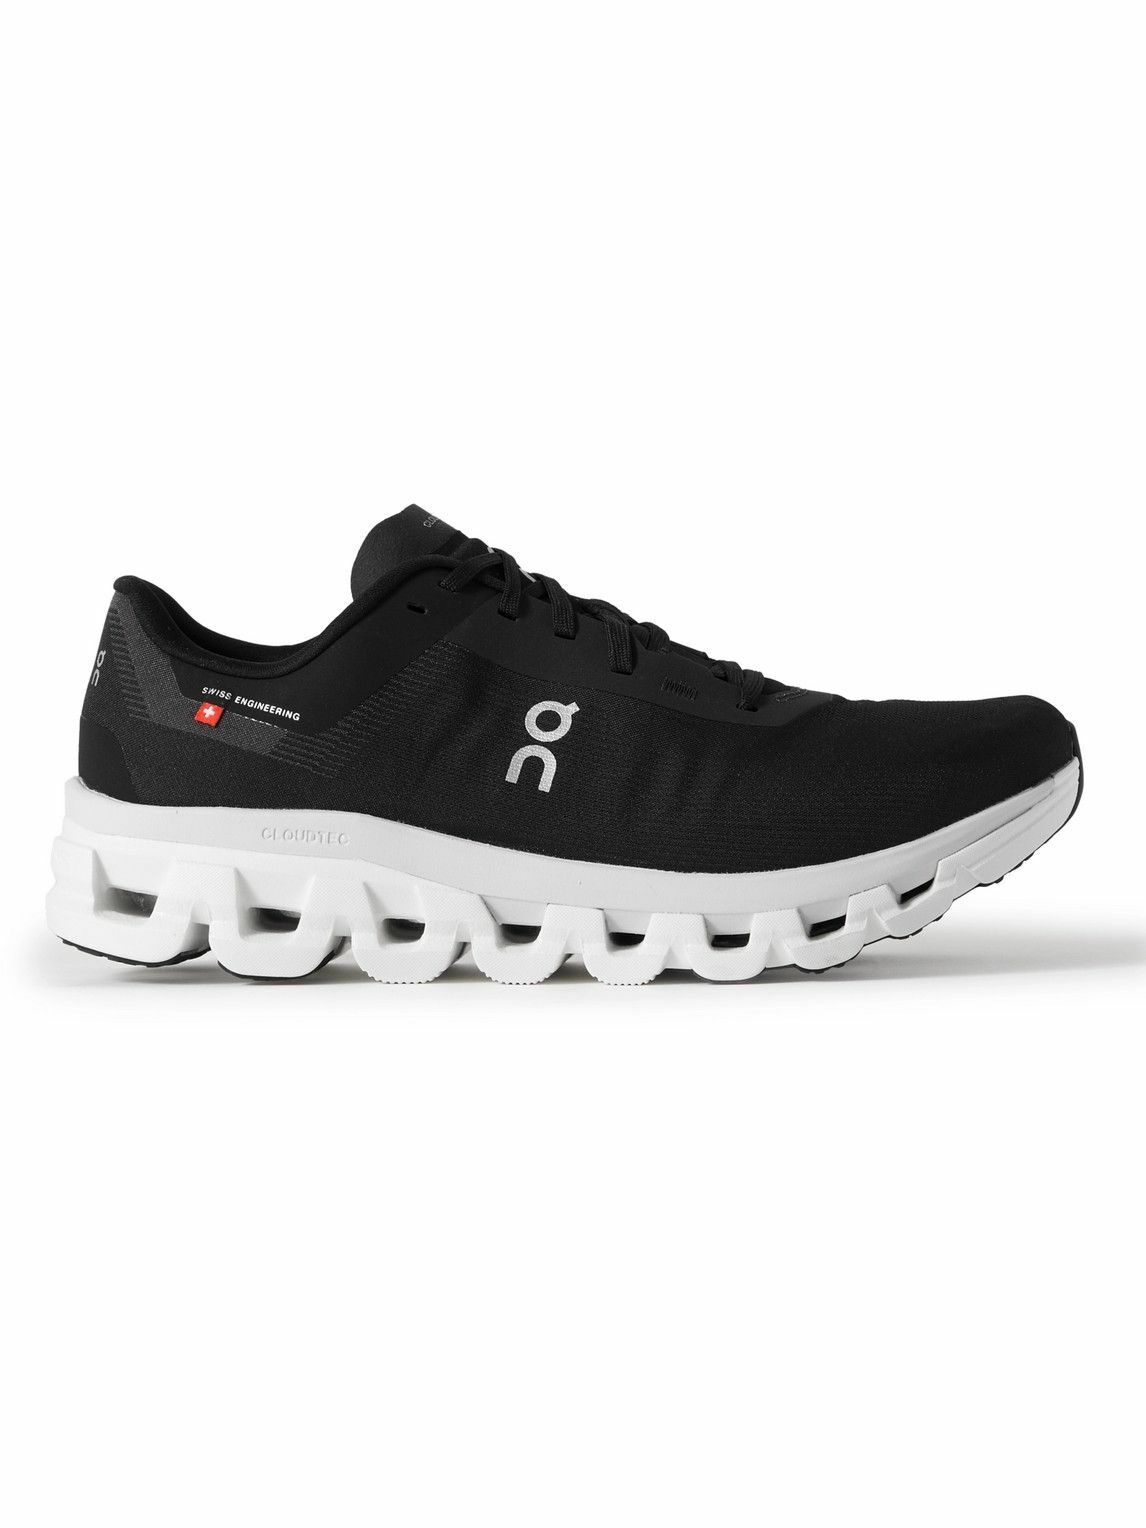 ON - Cloudflow 4 Rubber-Trimmed Mesh Running Sneakers - Black On